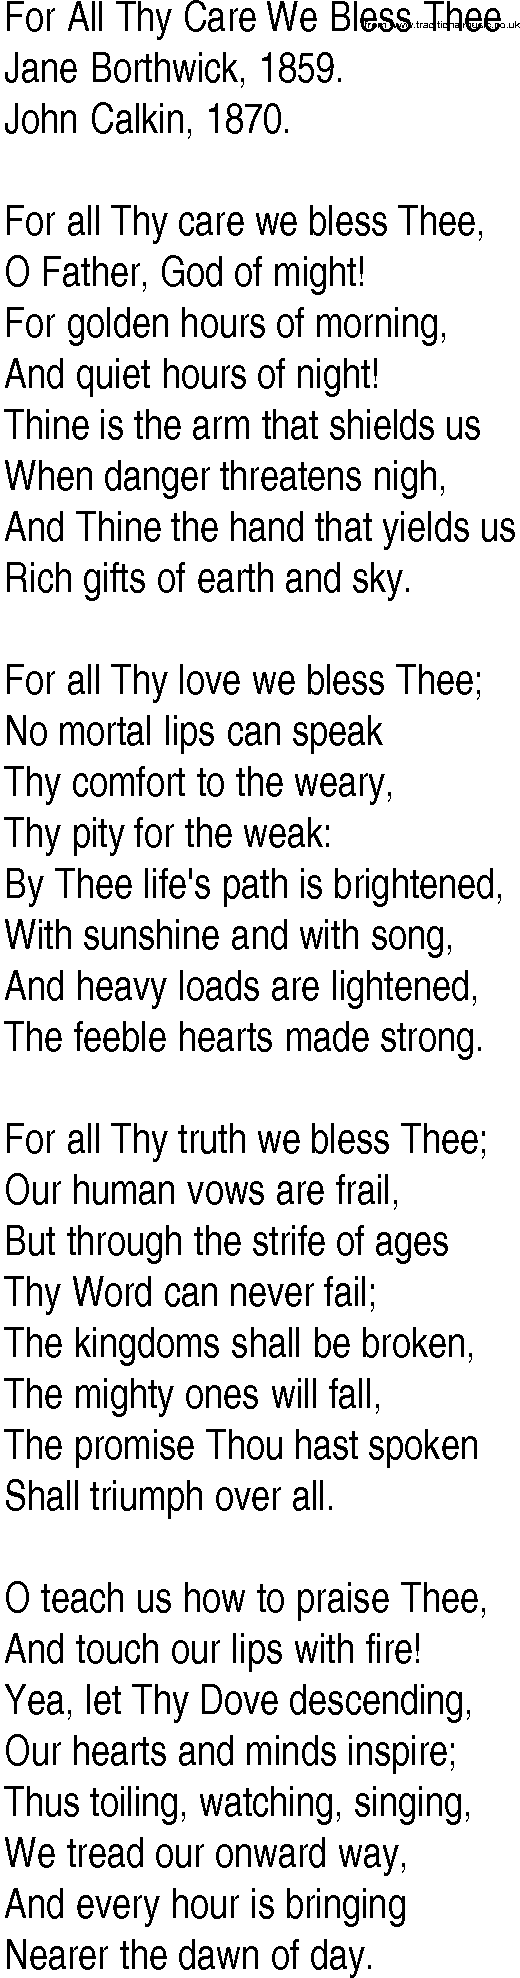 Hymn and Gospel Song: For All Thy Care We Bless Thee by Jane Borthwick lyrics